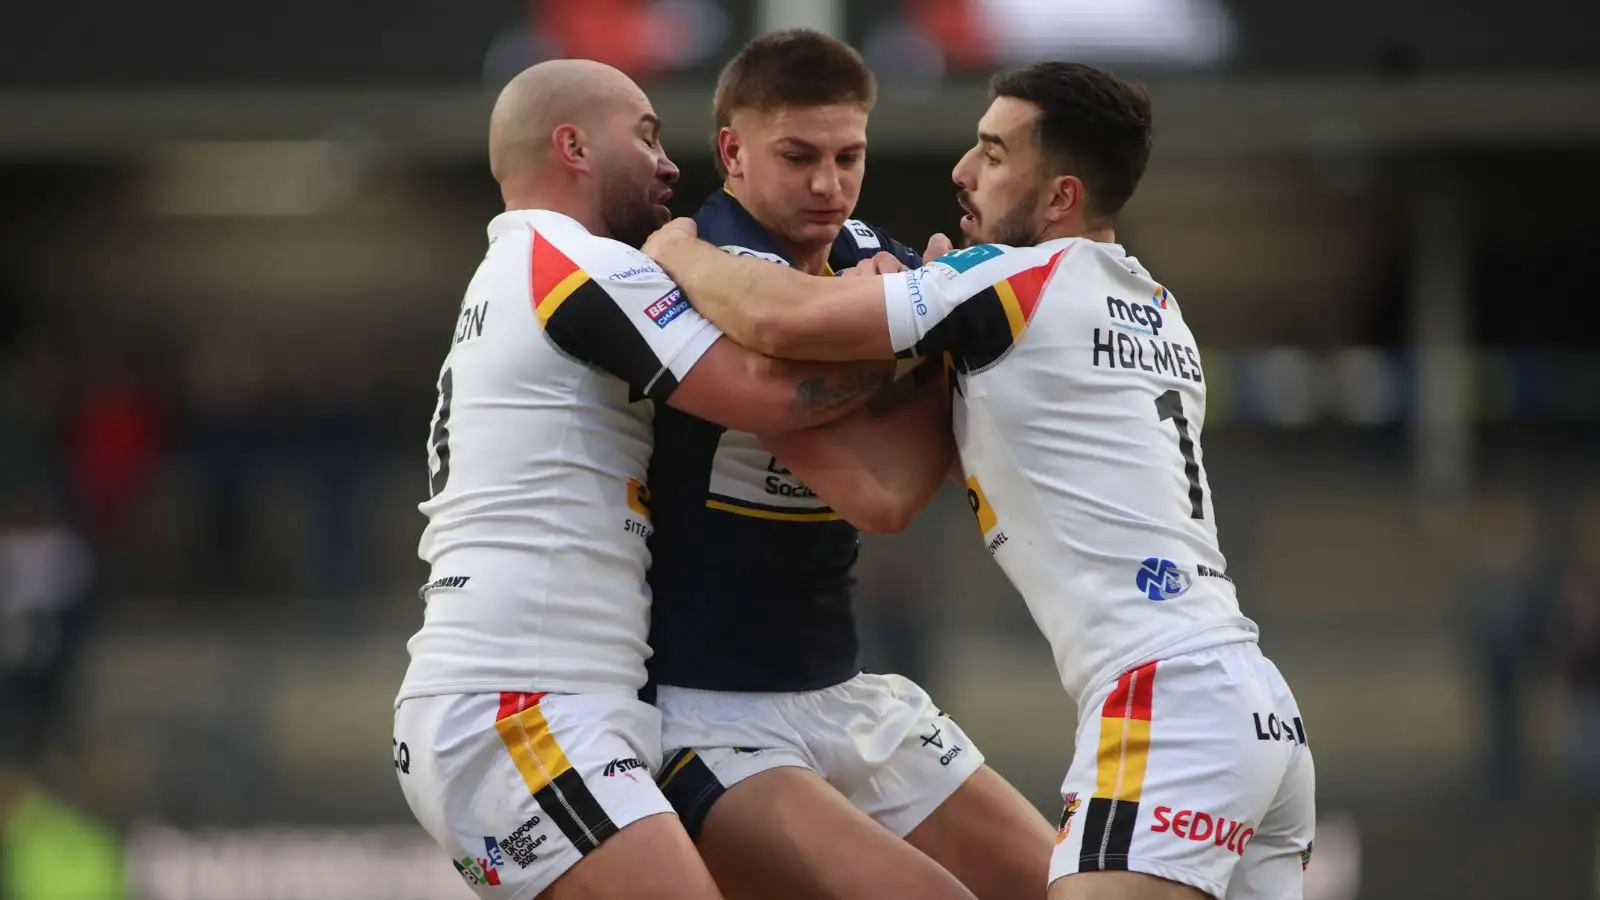 Bradford Bulls’ Tom Holmes issues positive health update: ‘Best get myself some new boots!’